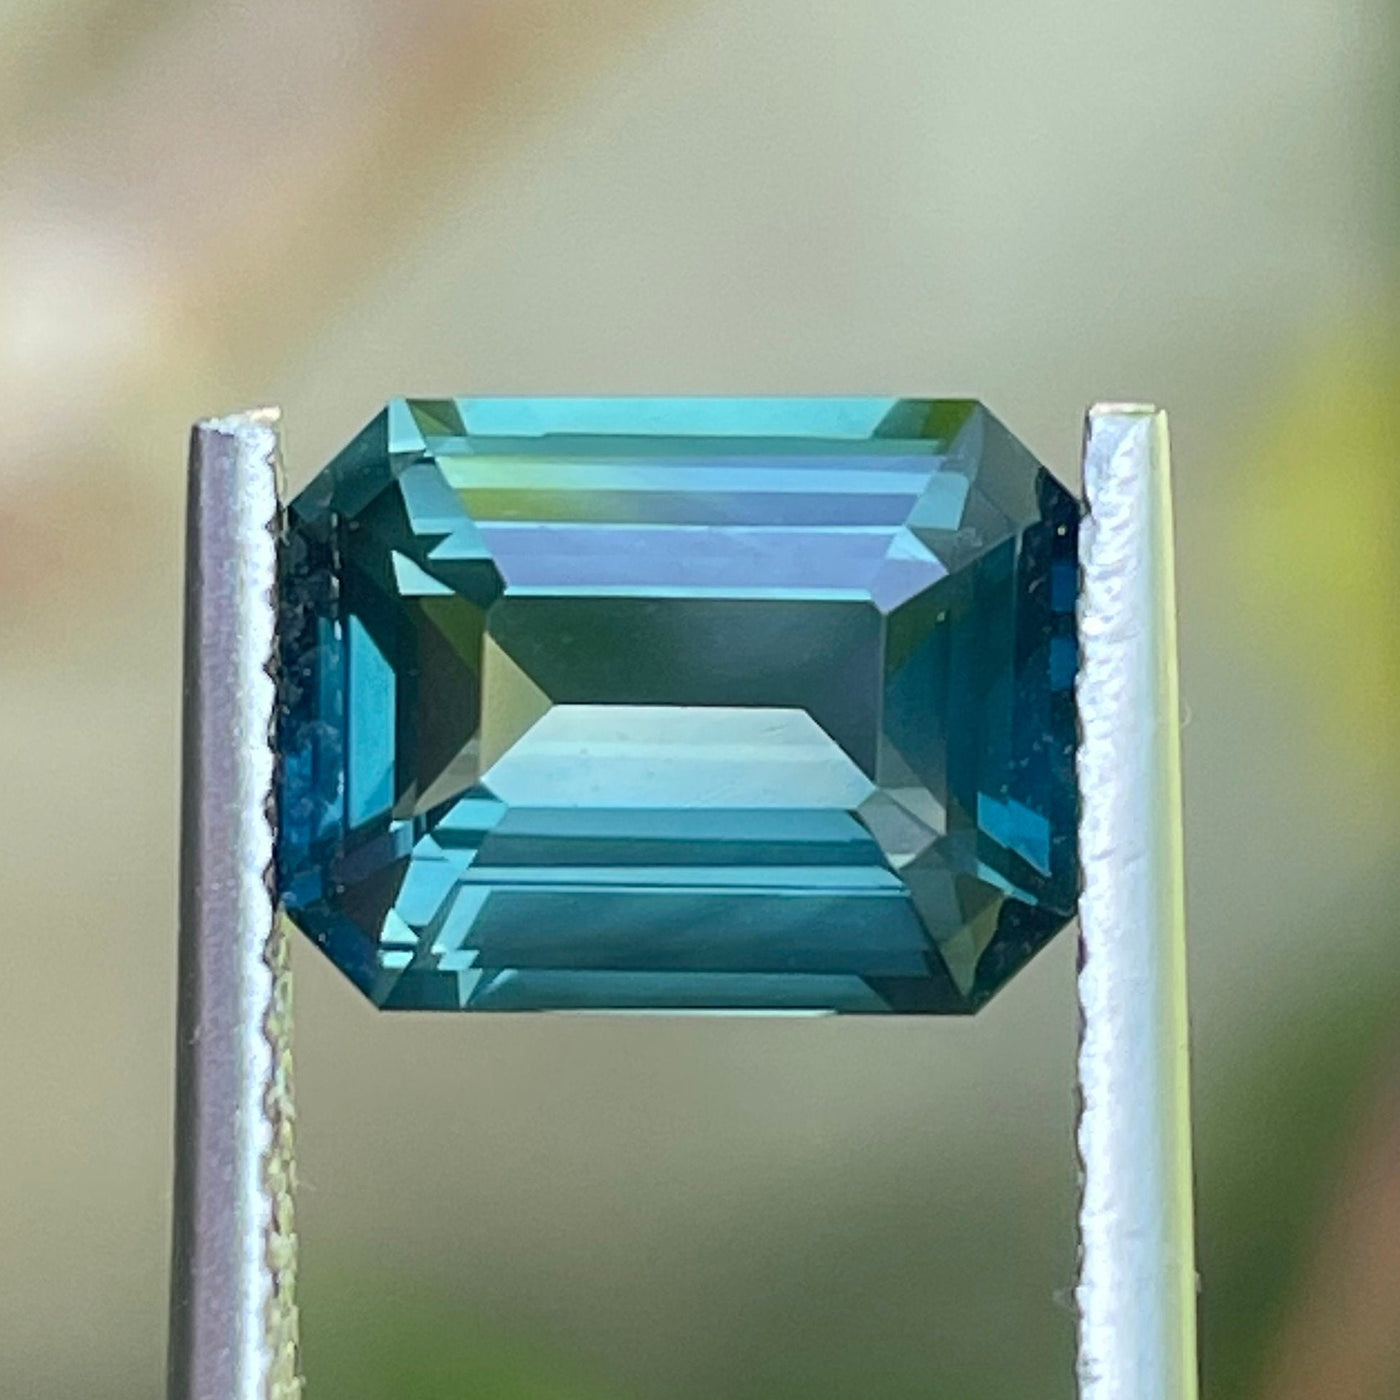 Teal Sapphire  3.05 Ct